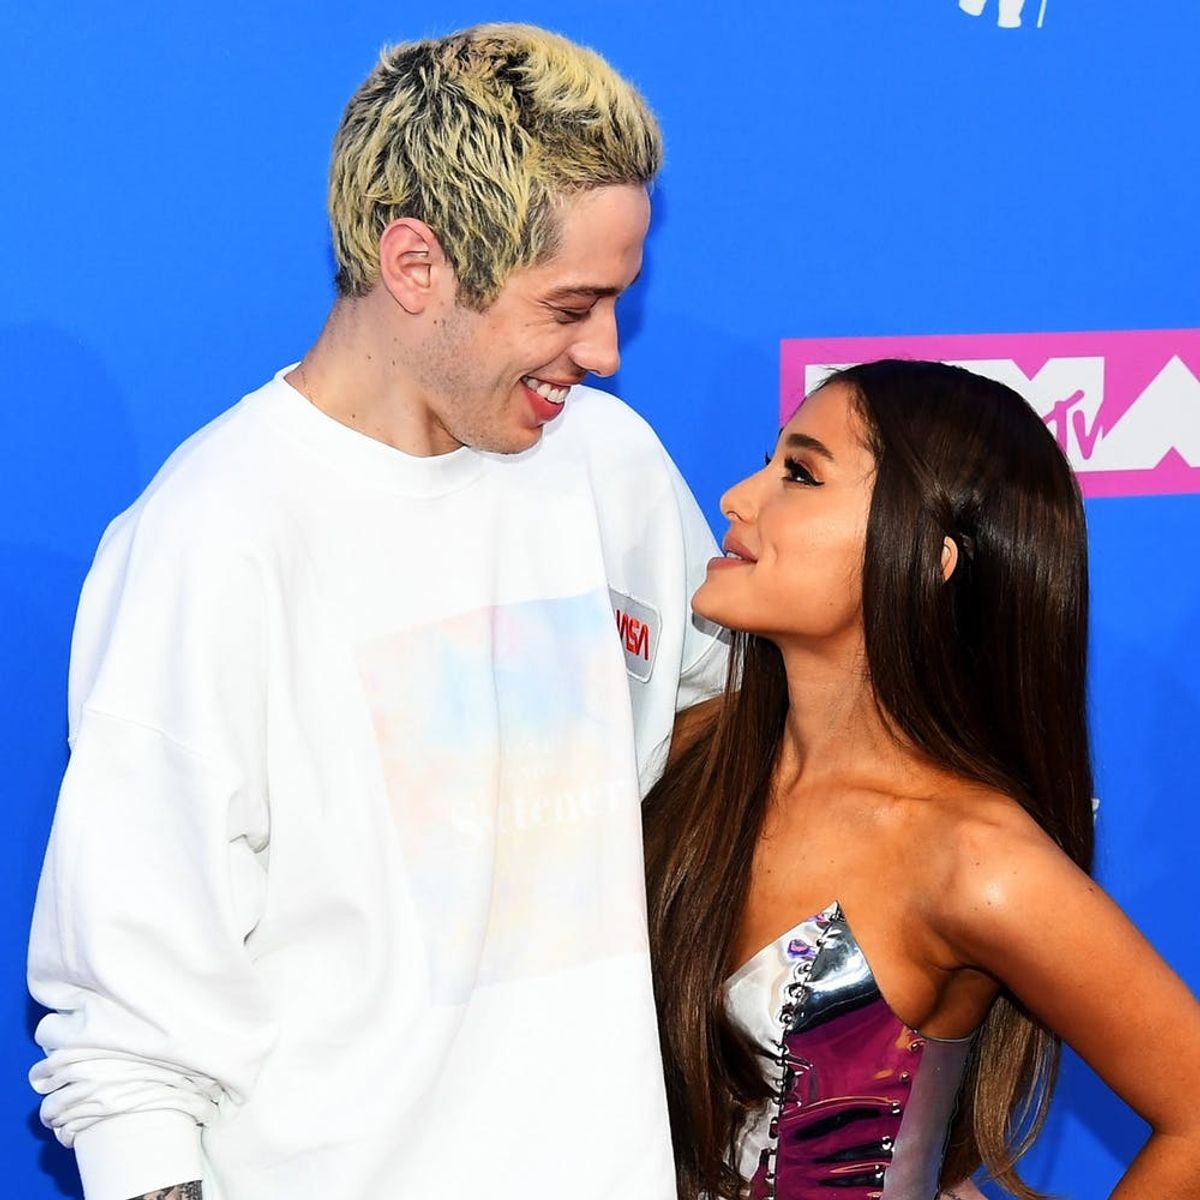 Pete Davidson Reveals the Super Low-Key Way He Proposed to Ariana Grande